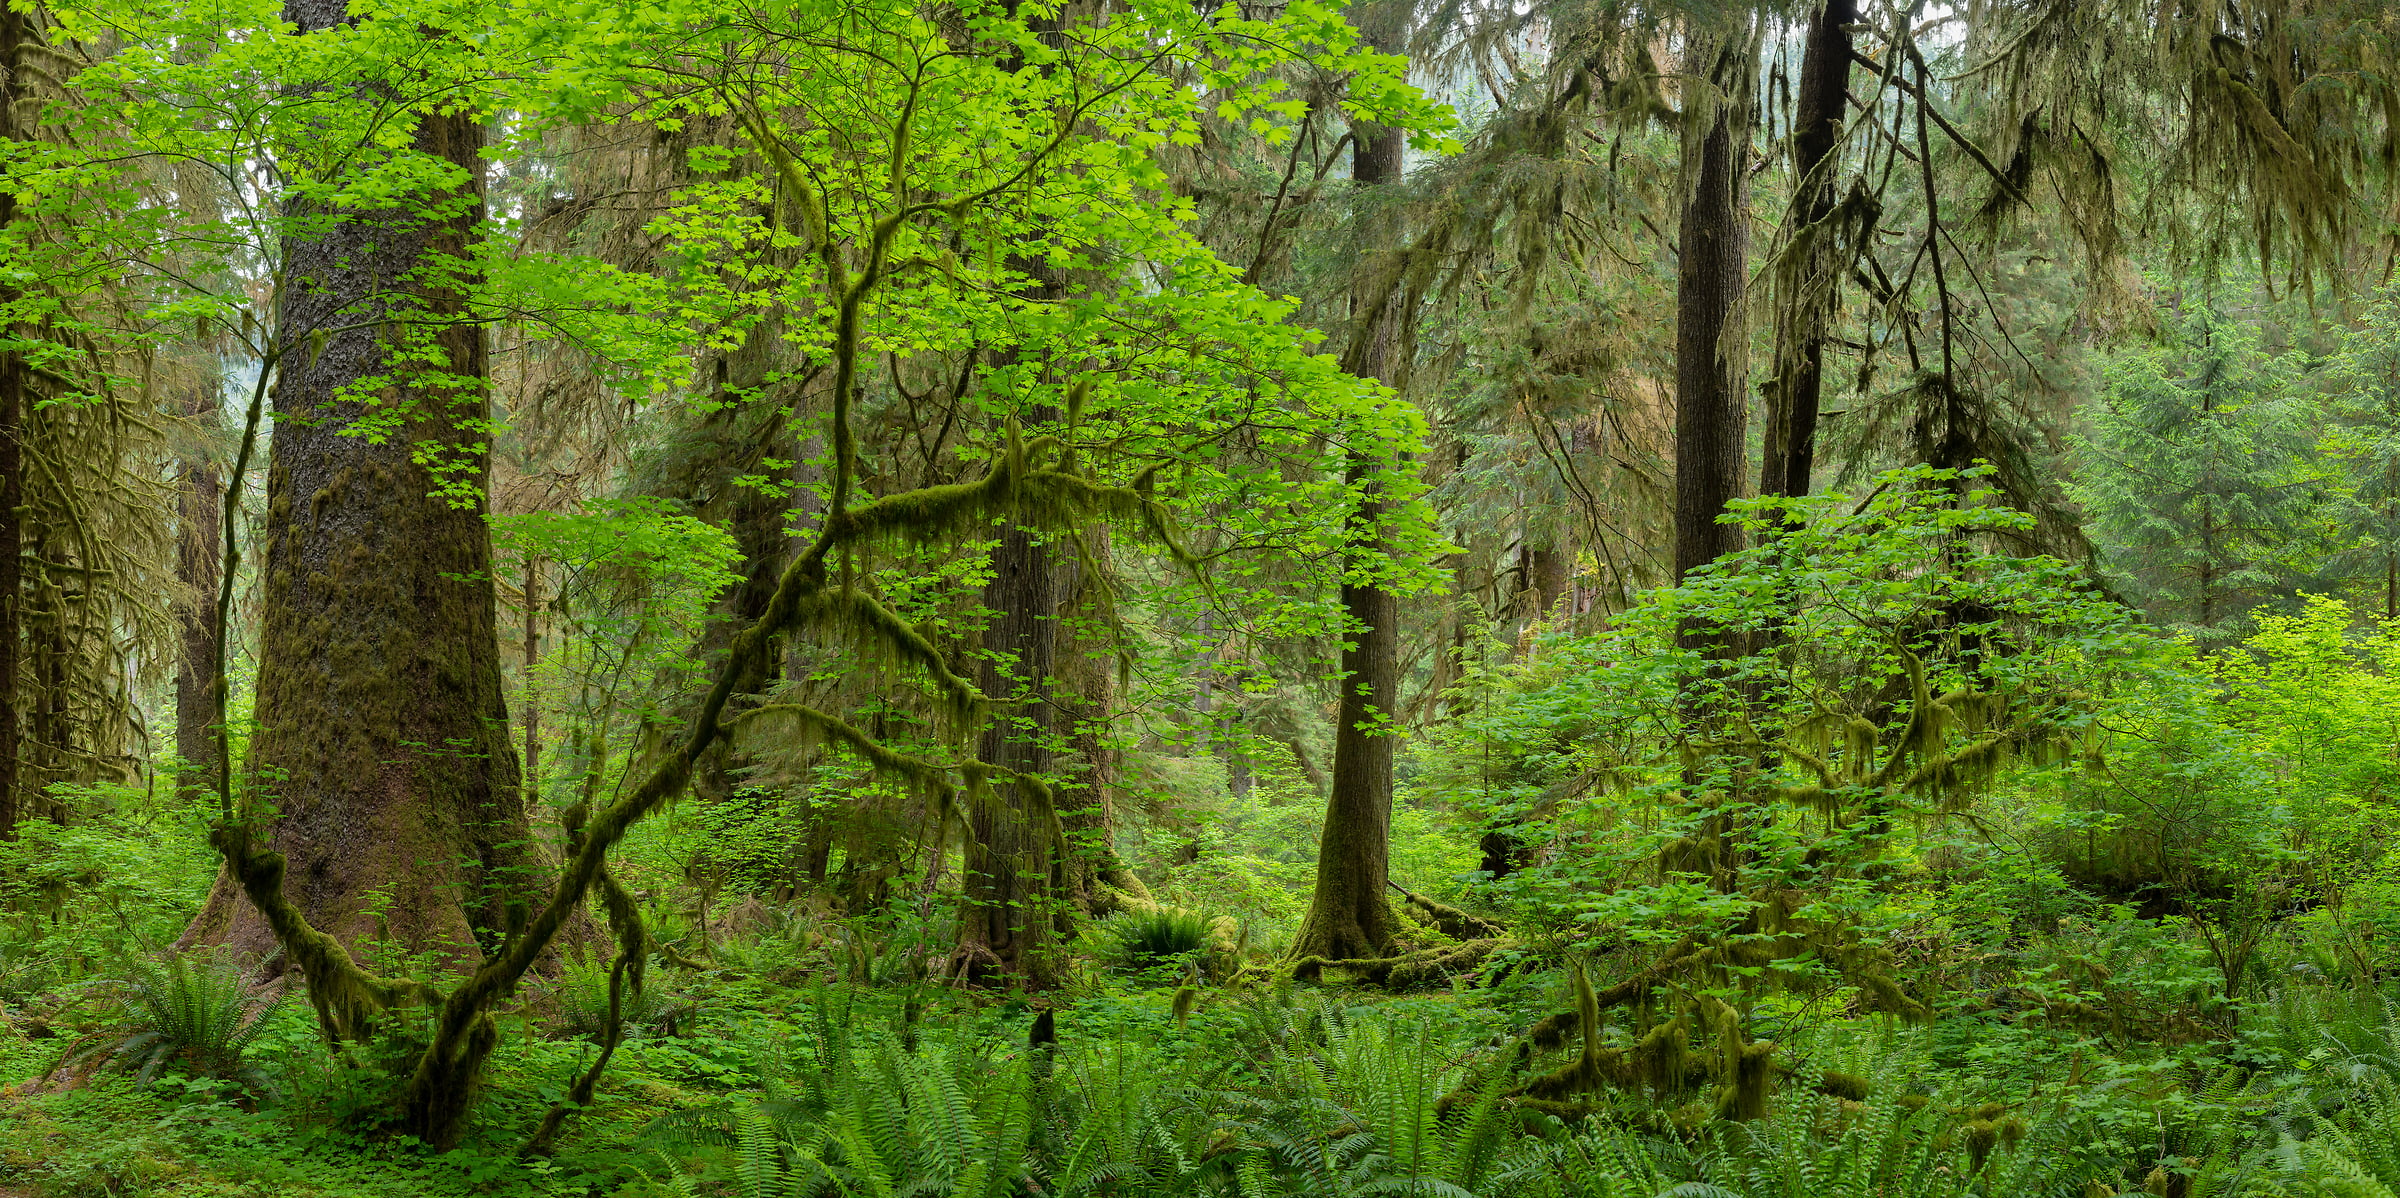 211 megapixels! A very high resolution, large-format VAST photo print of a lush green forest; nature photograph created by Greg Probst in Olympic National Park, Washington.